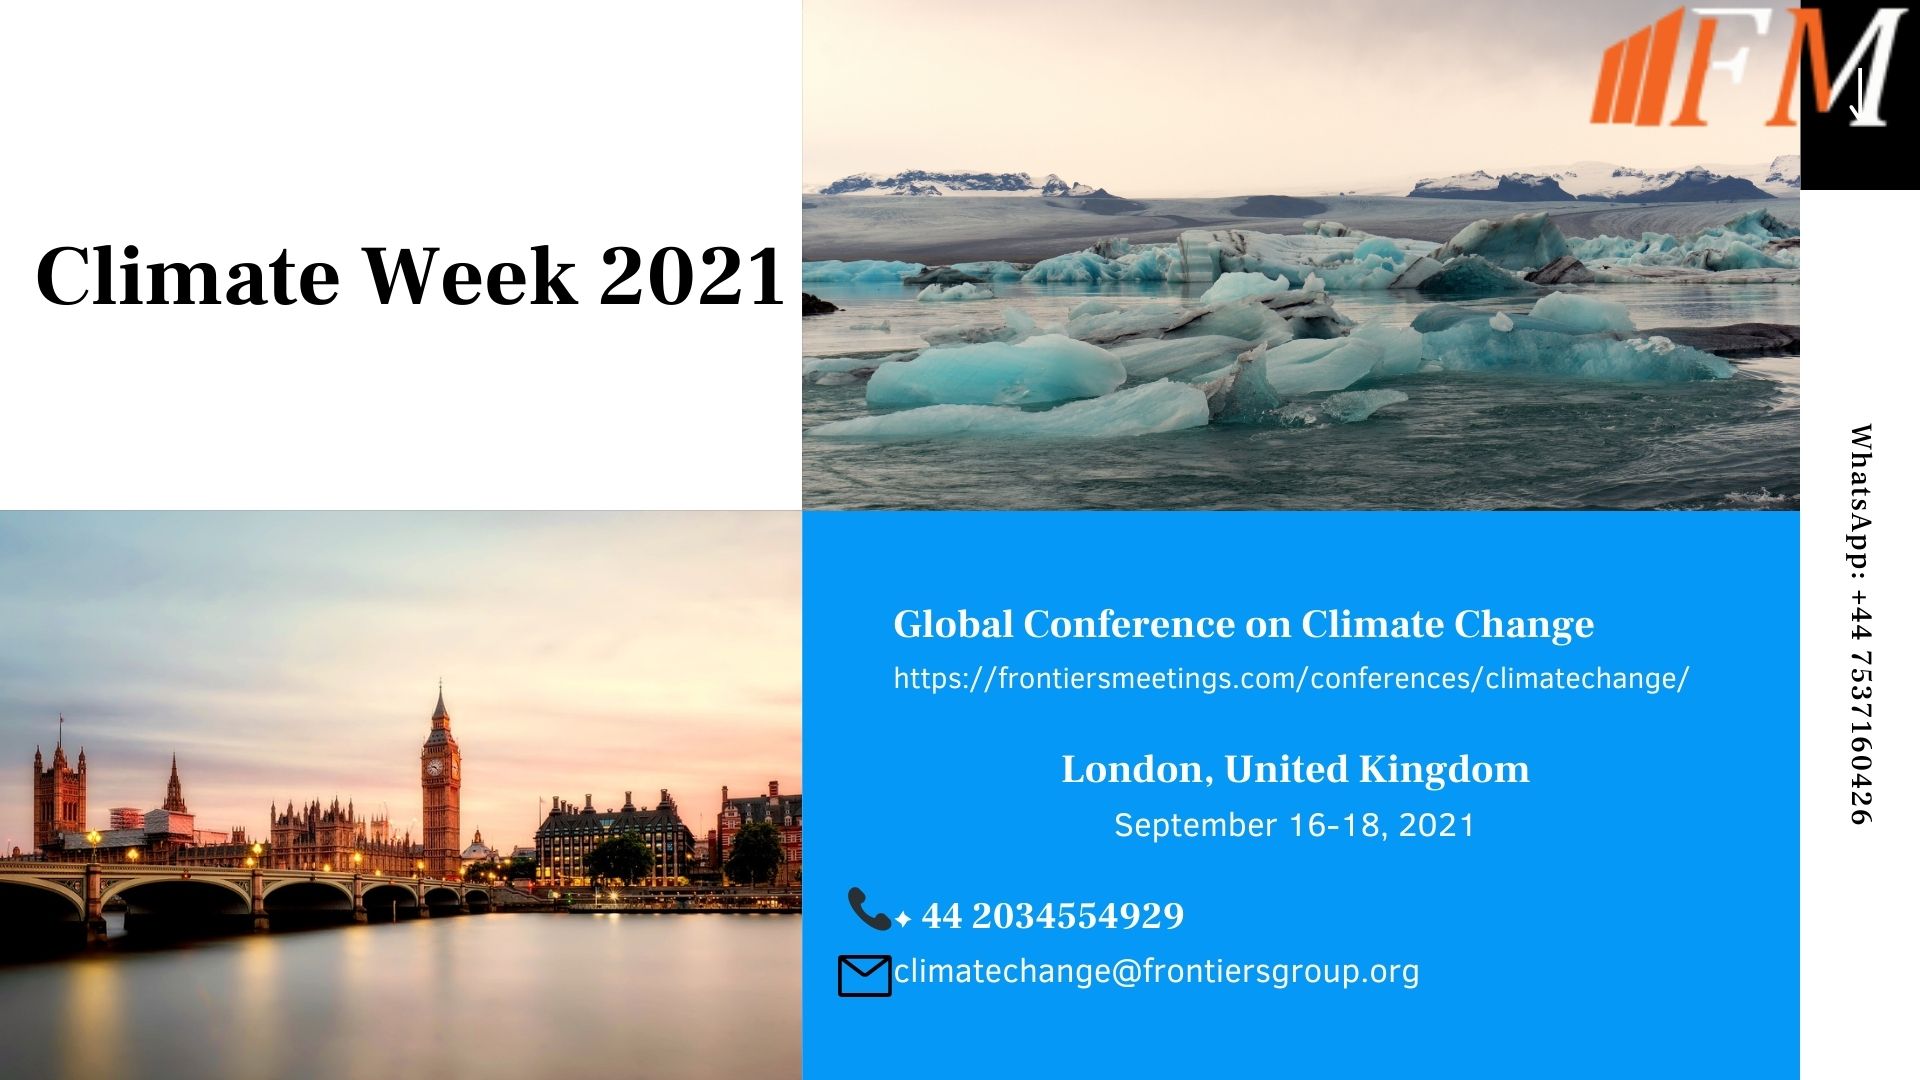 Climate Week 2021: Global Conference on Climate Change, London, United Kingdom